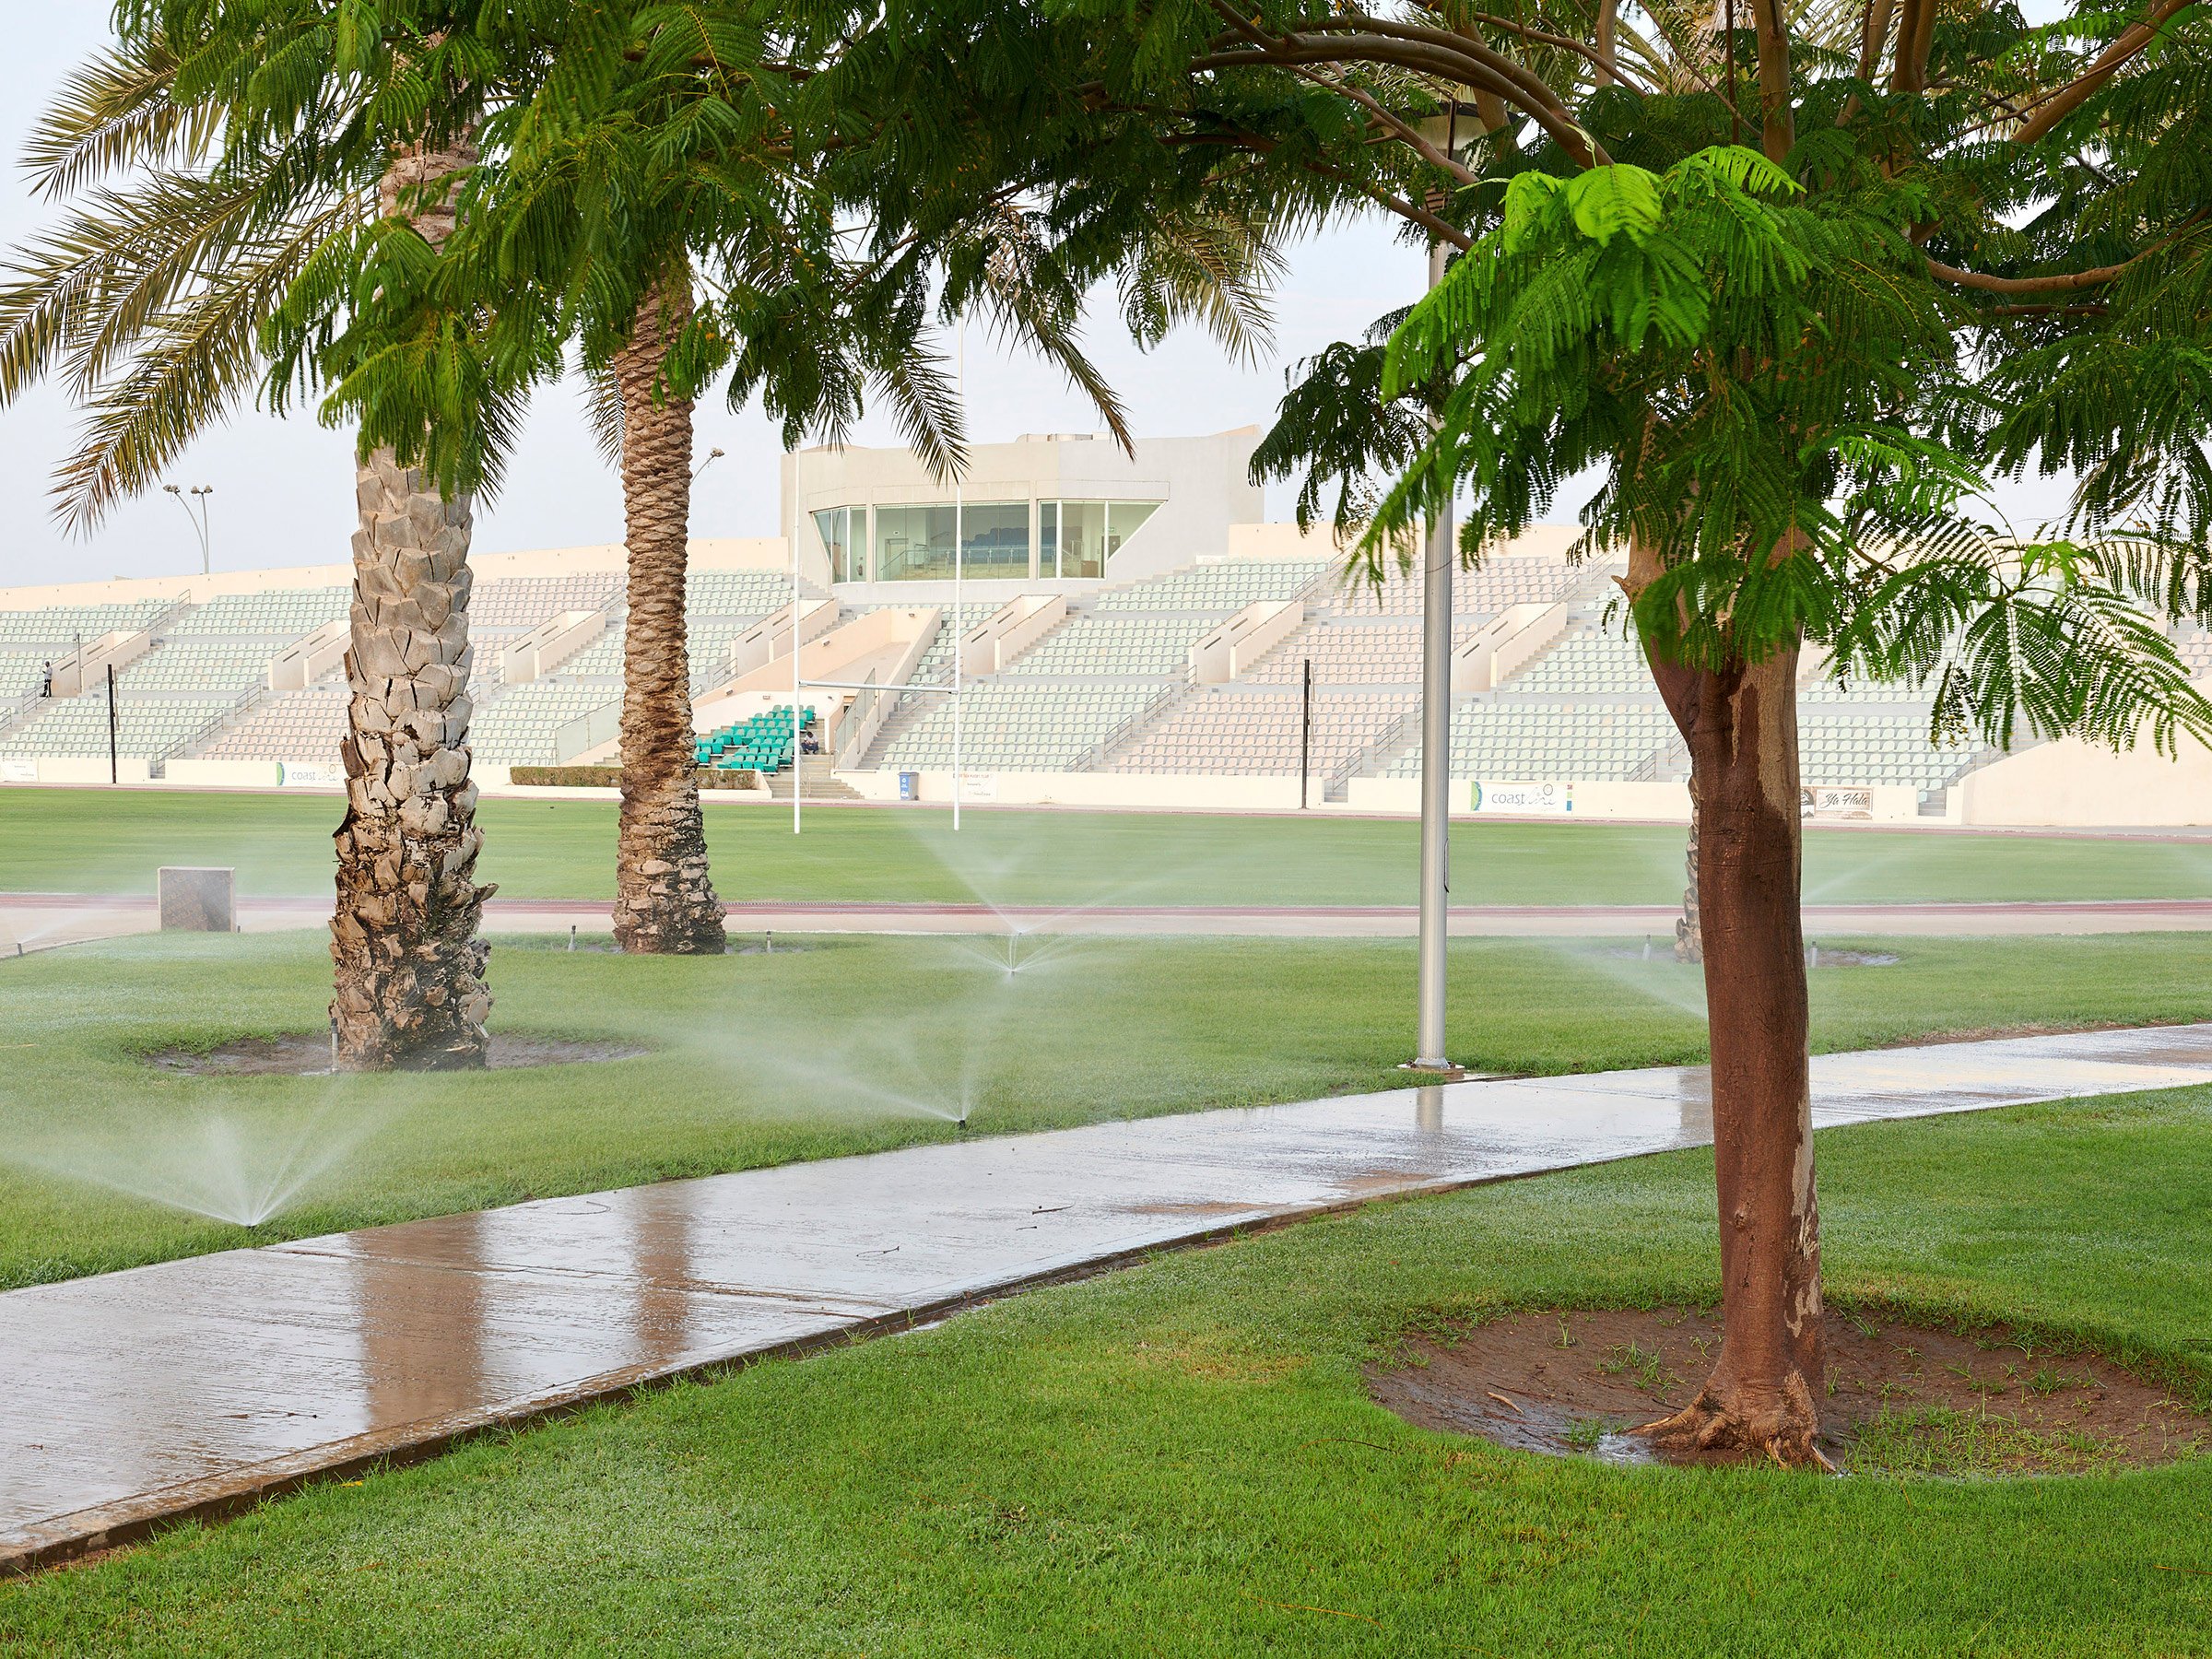 Sprinklers release desalinated water on a grassy area at the athletic stadium at King Abdullah University of Science and Technology in Thuwal, Saudi Arabia, Oct. 2019.